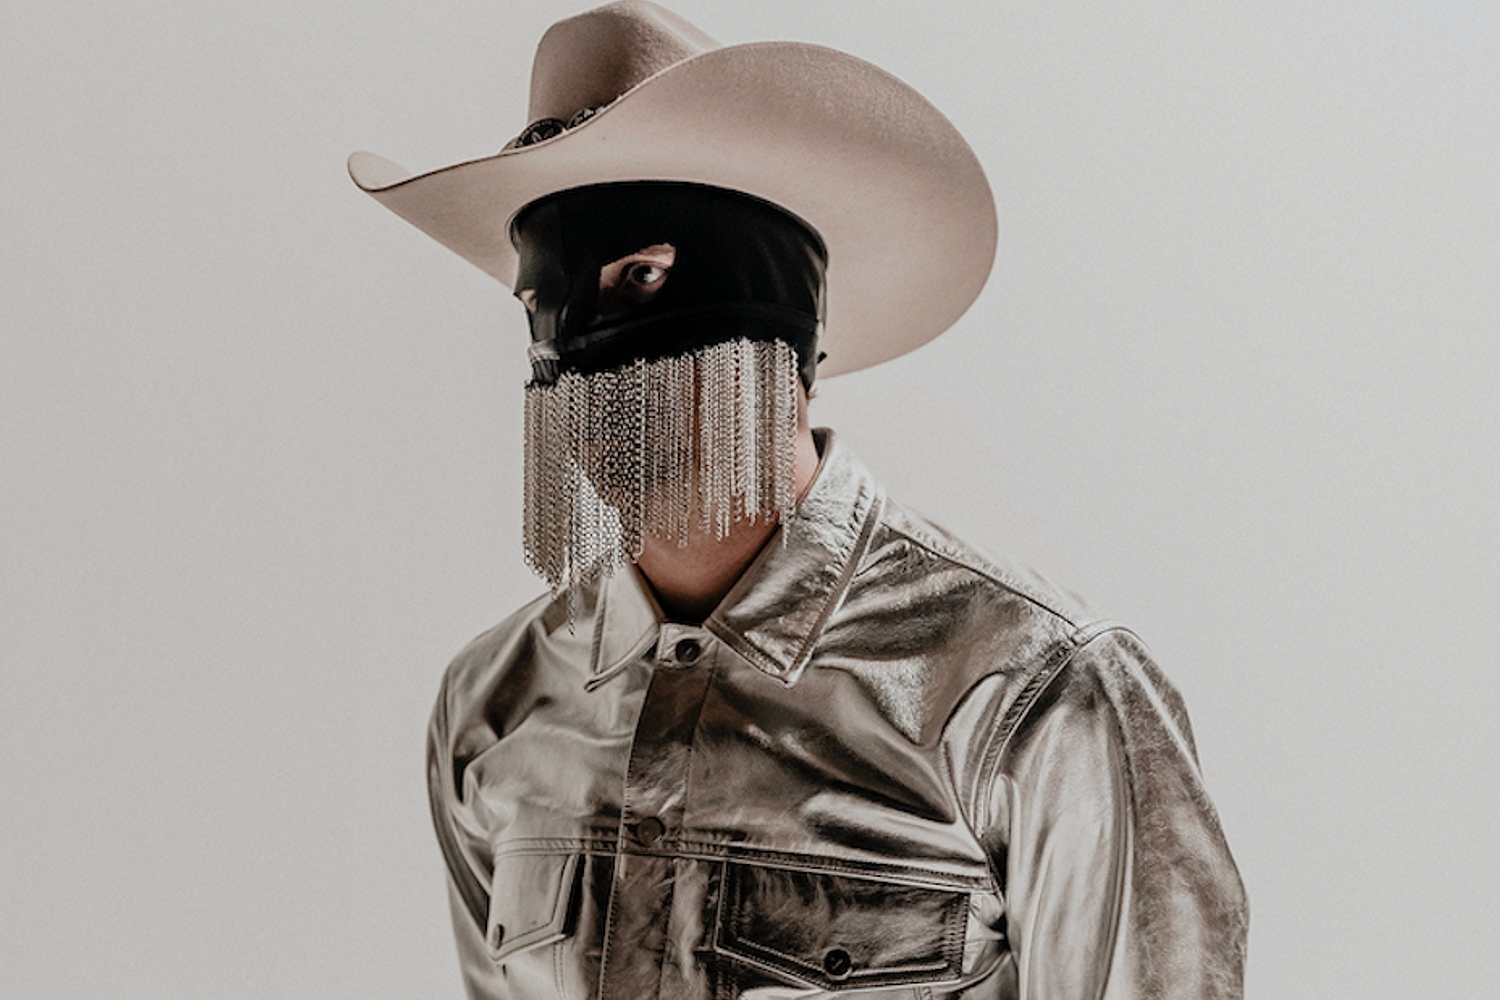 Orville Peck reflects on 2019 in ‘Nothing Fades Like The Light’ video